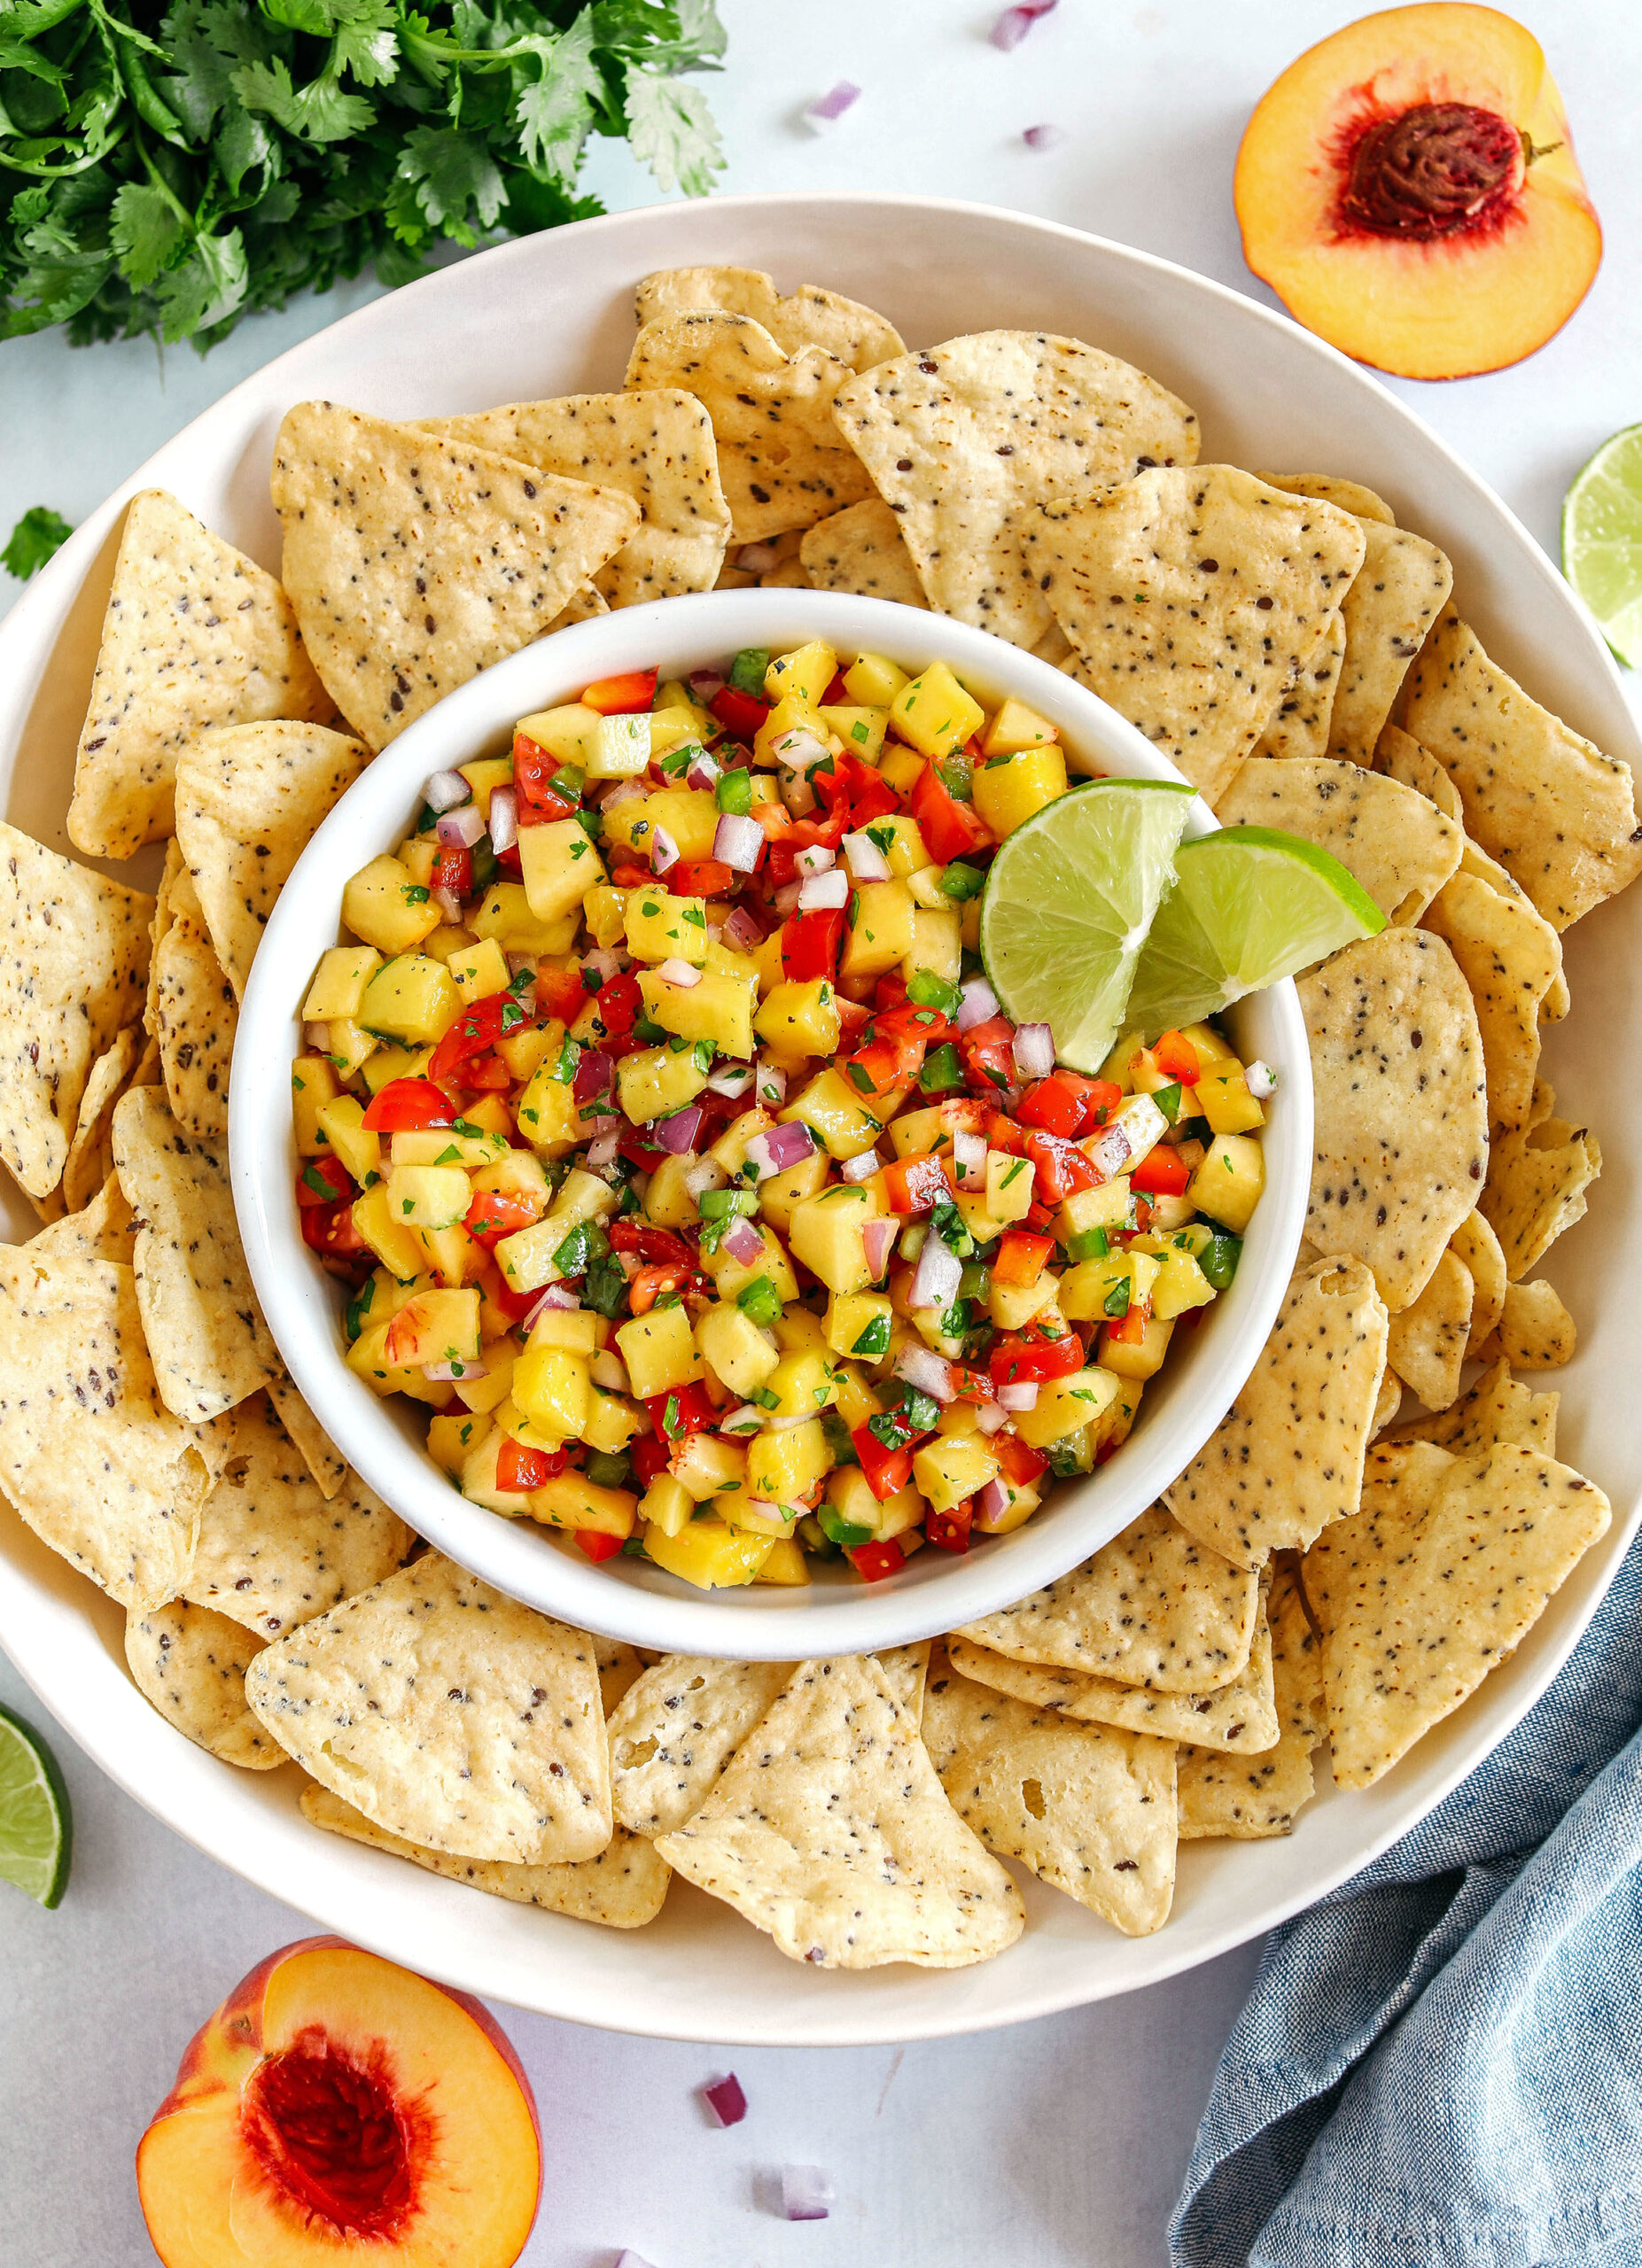 Fresh Peach Mango Salsa easily made in just minutes with only few simple ingredients that makes the perfect topping for tacos, grilled chicken or fish and makes a delicious appetizer served with tortilla chips!